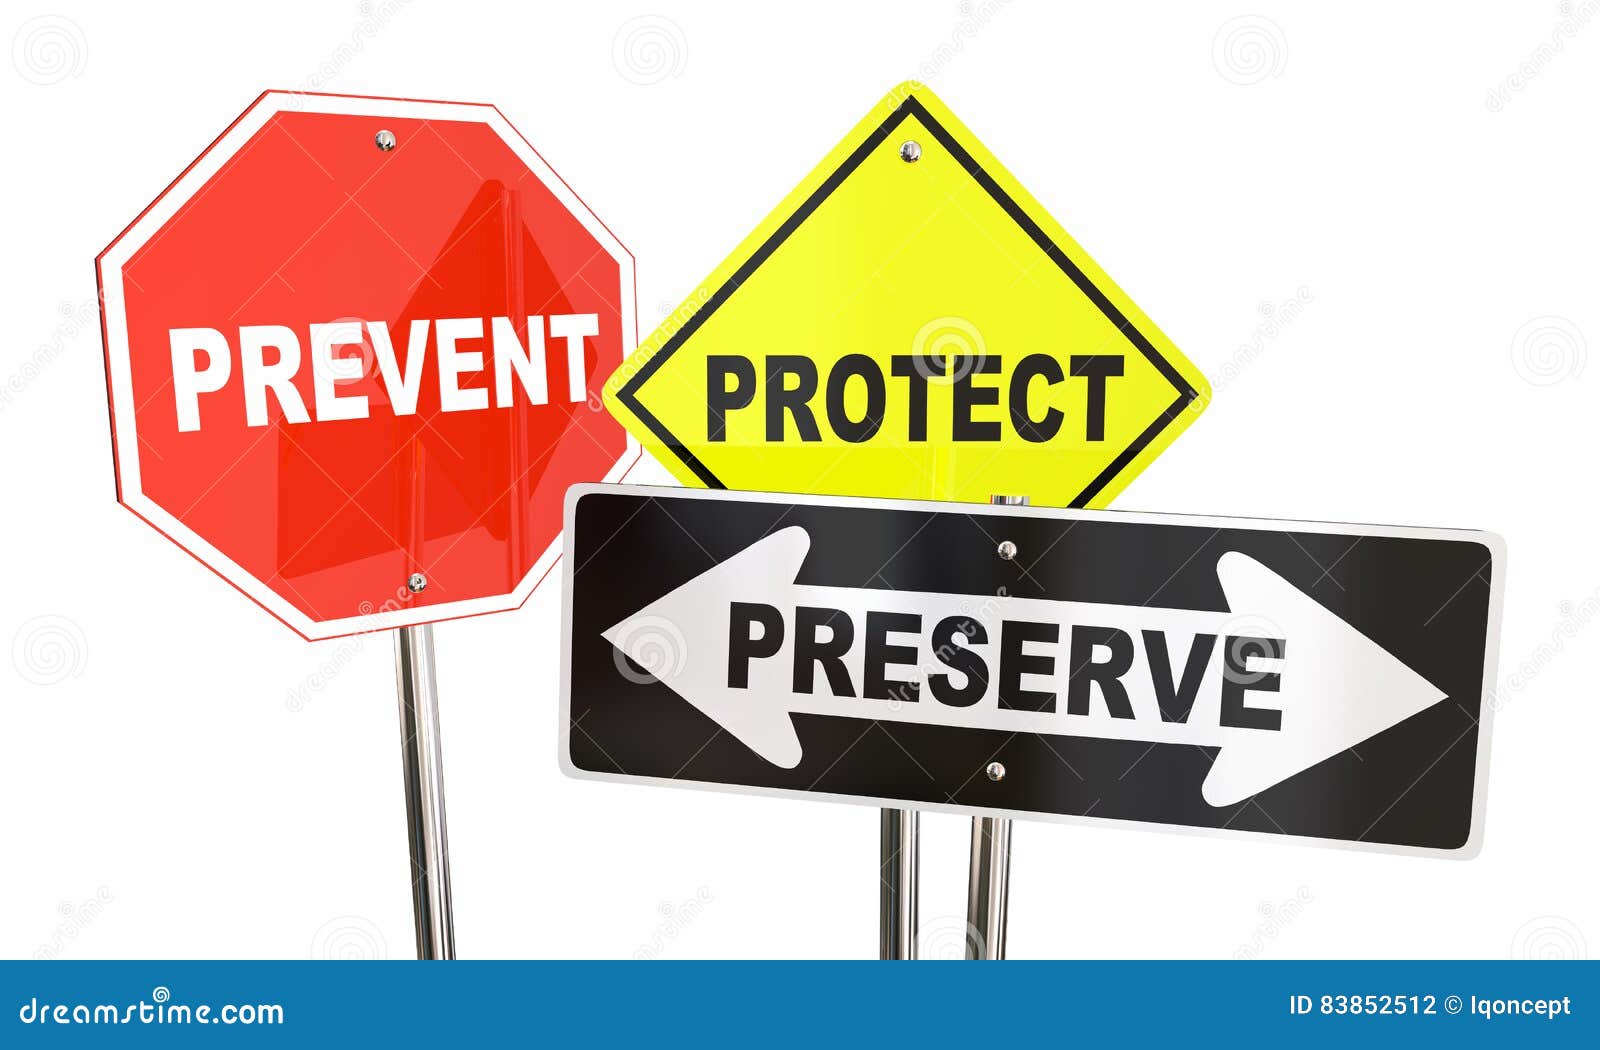 prevent protect preserve road street signs safety security